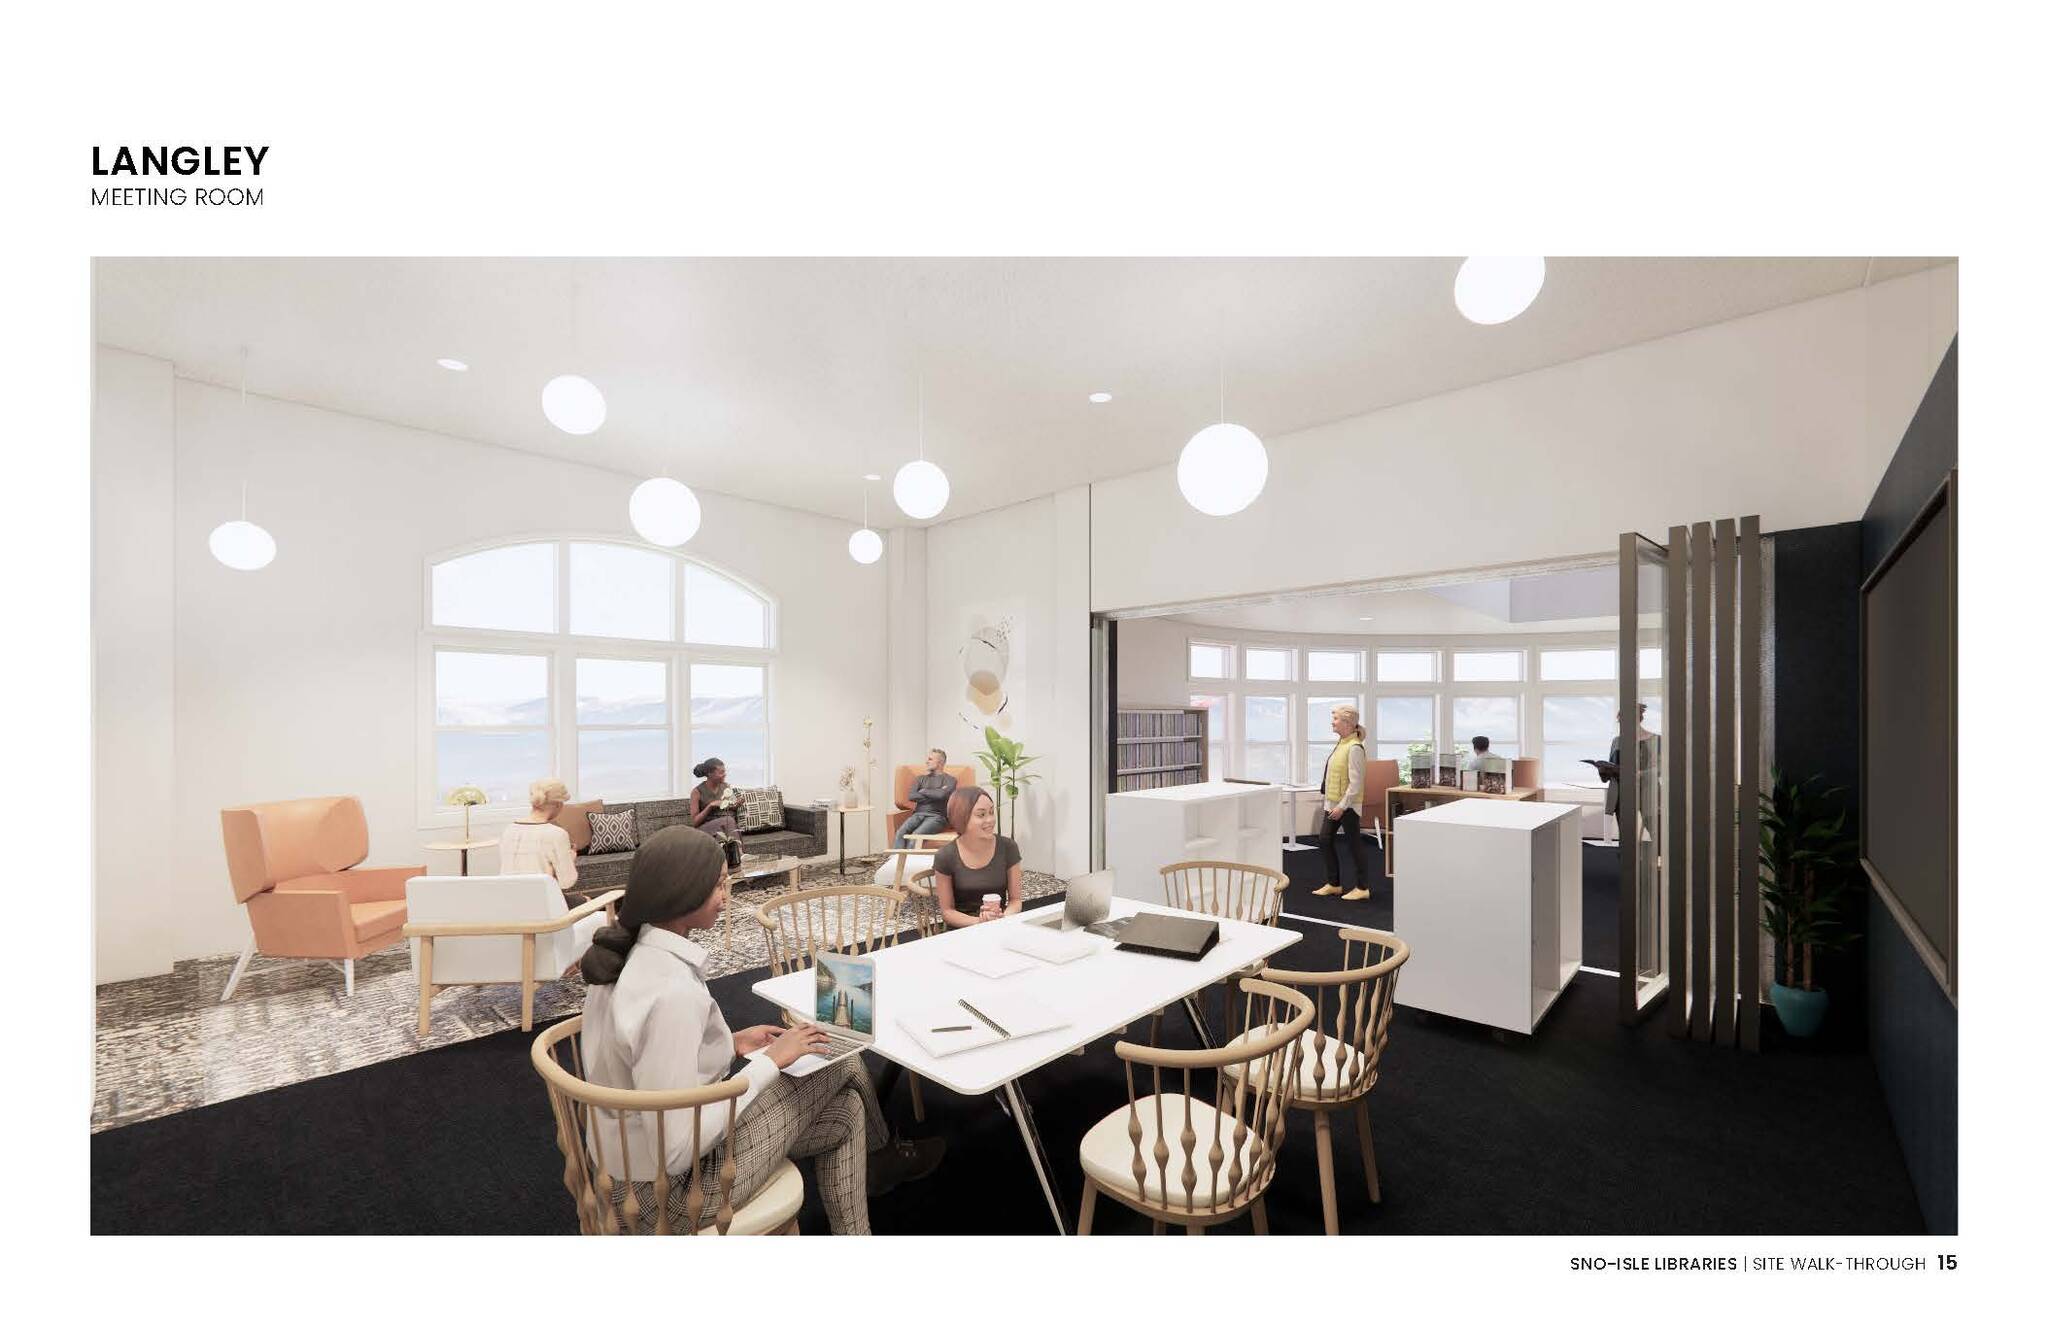 A 500-square-foot meeting room is one of the exciting additions to the Langley Library. (Concept art provided)